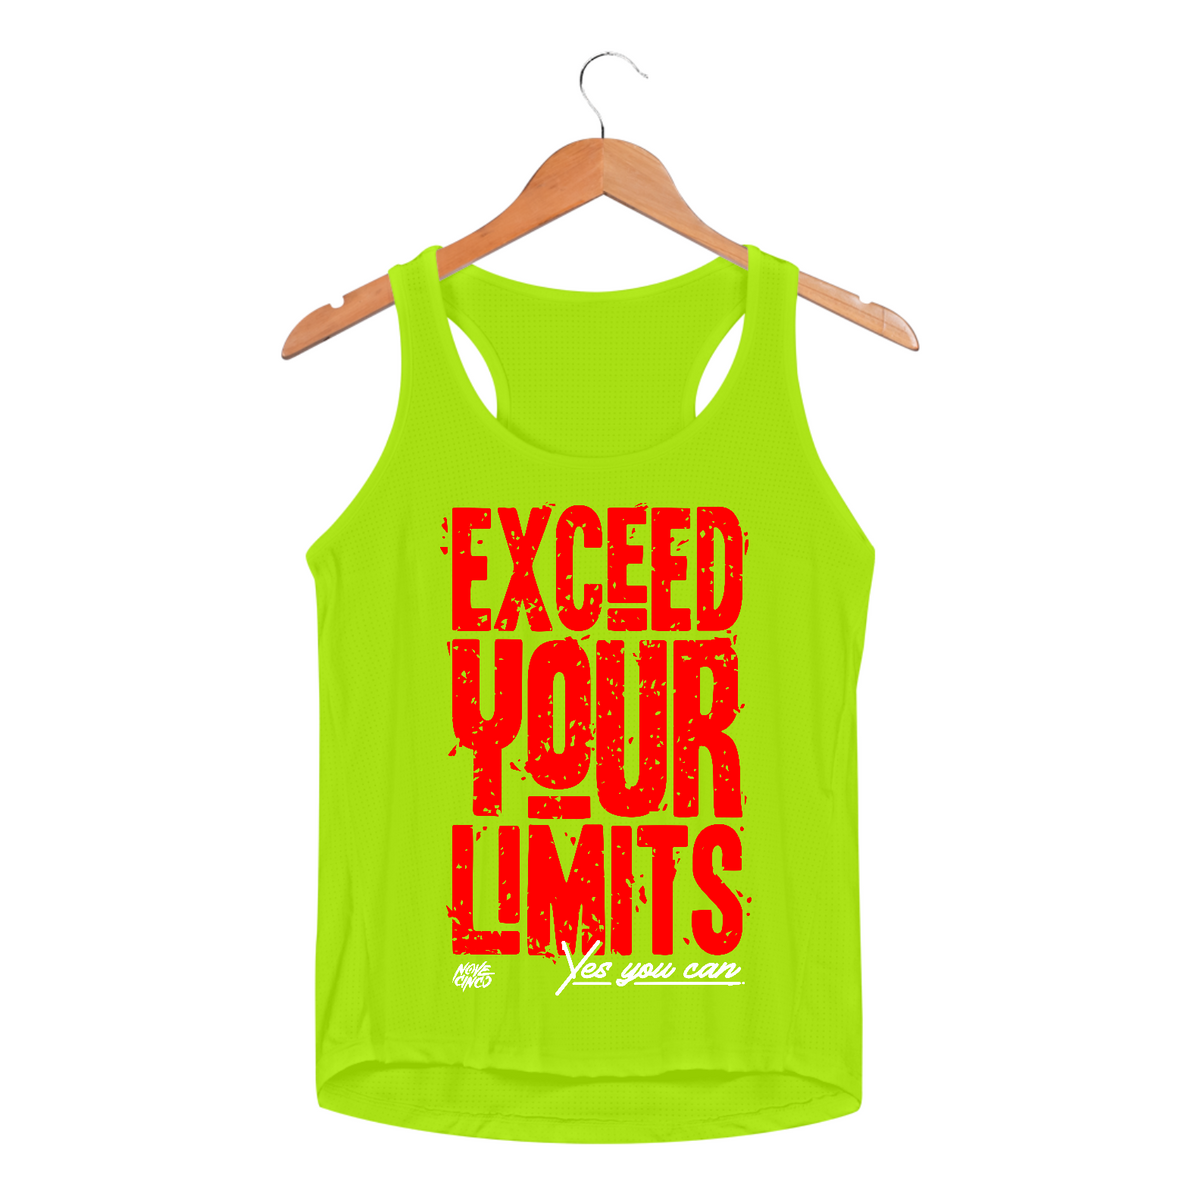 Nome do produto: Exceed Your Limits - Fem. (Dry Fit)